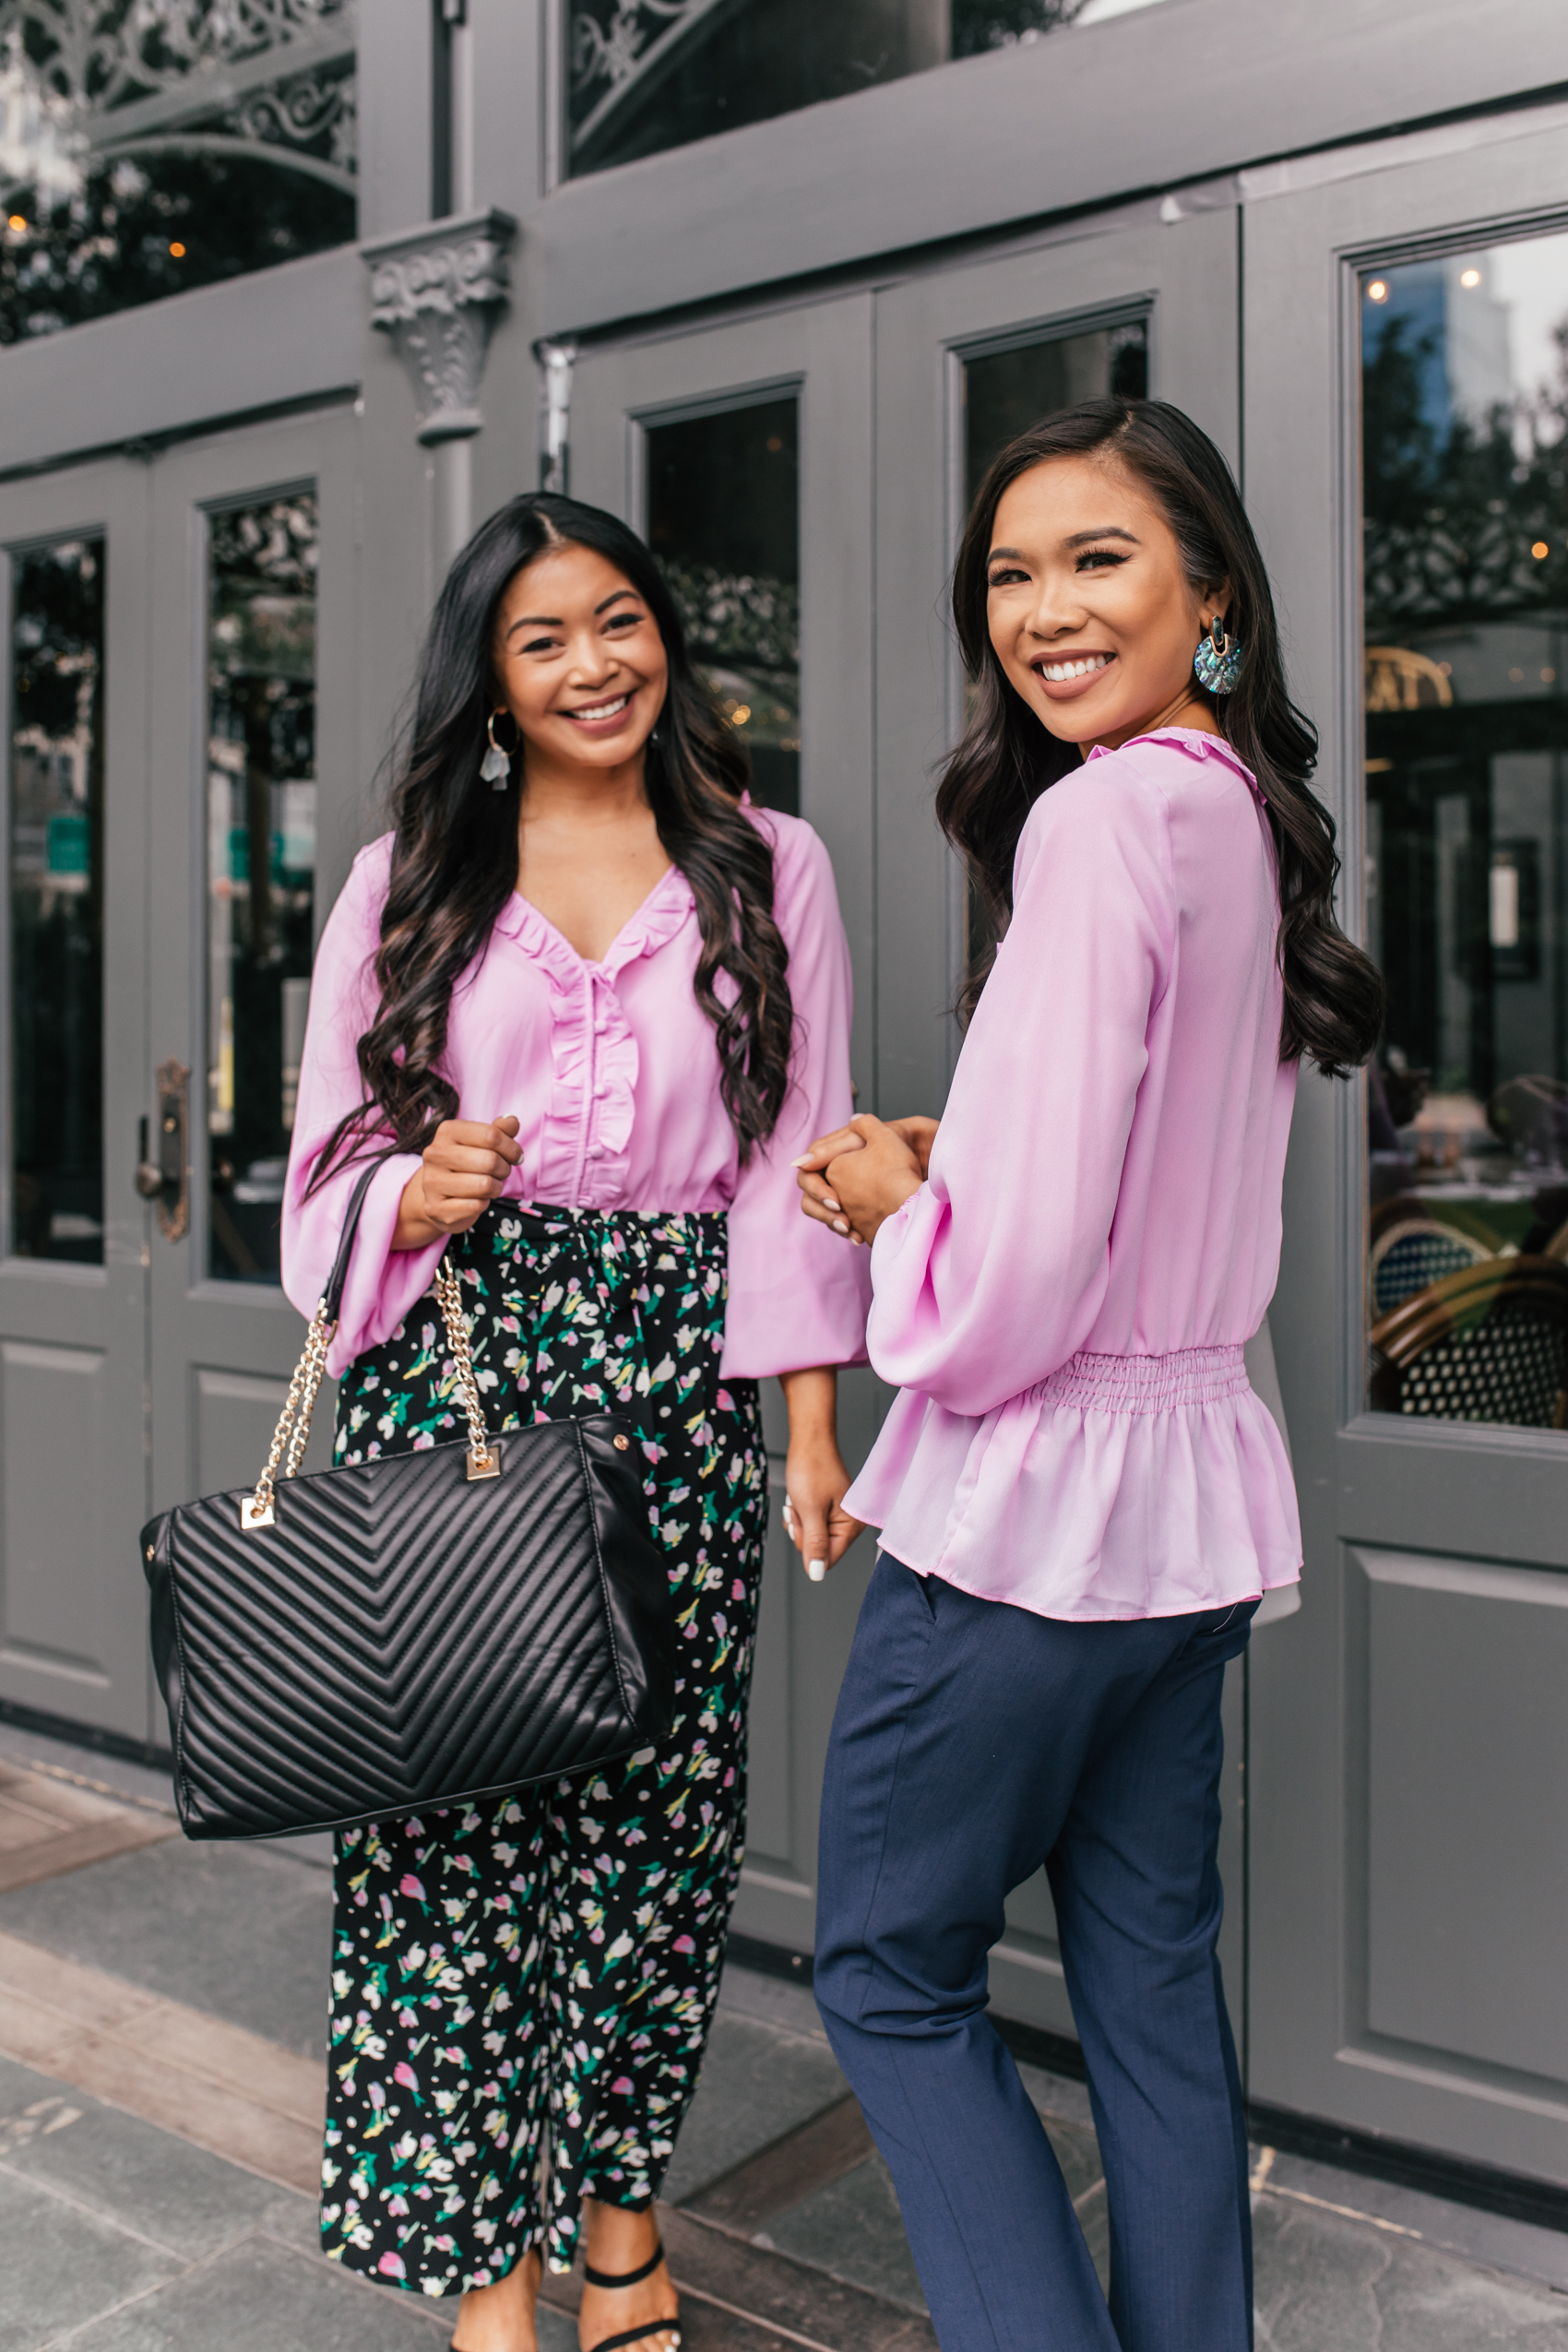 Two fashion bloggers share how to style one top two ways for work